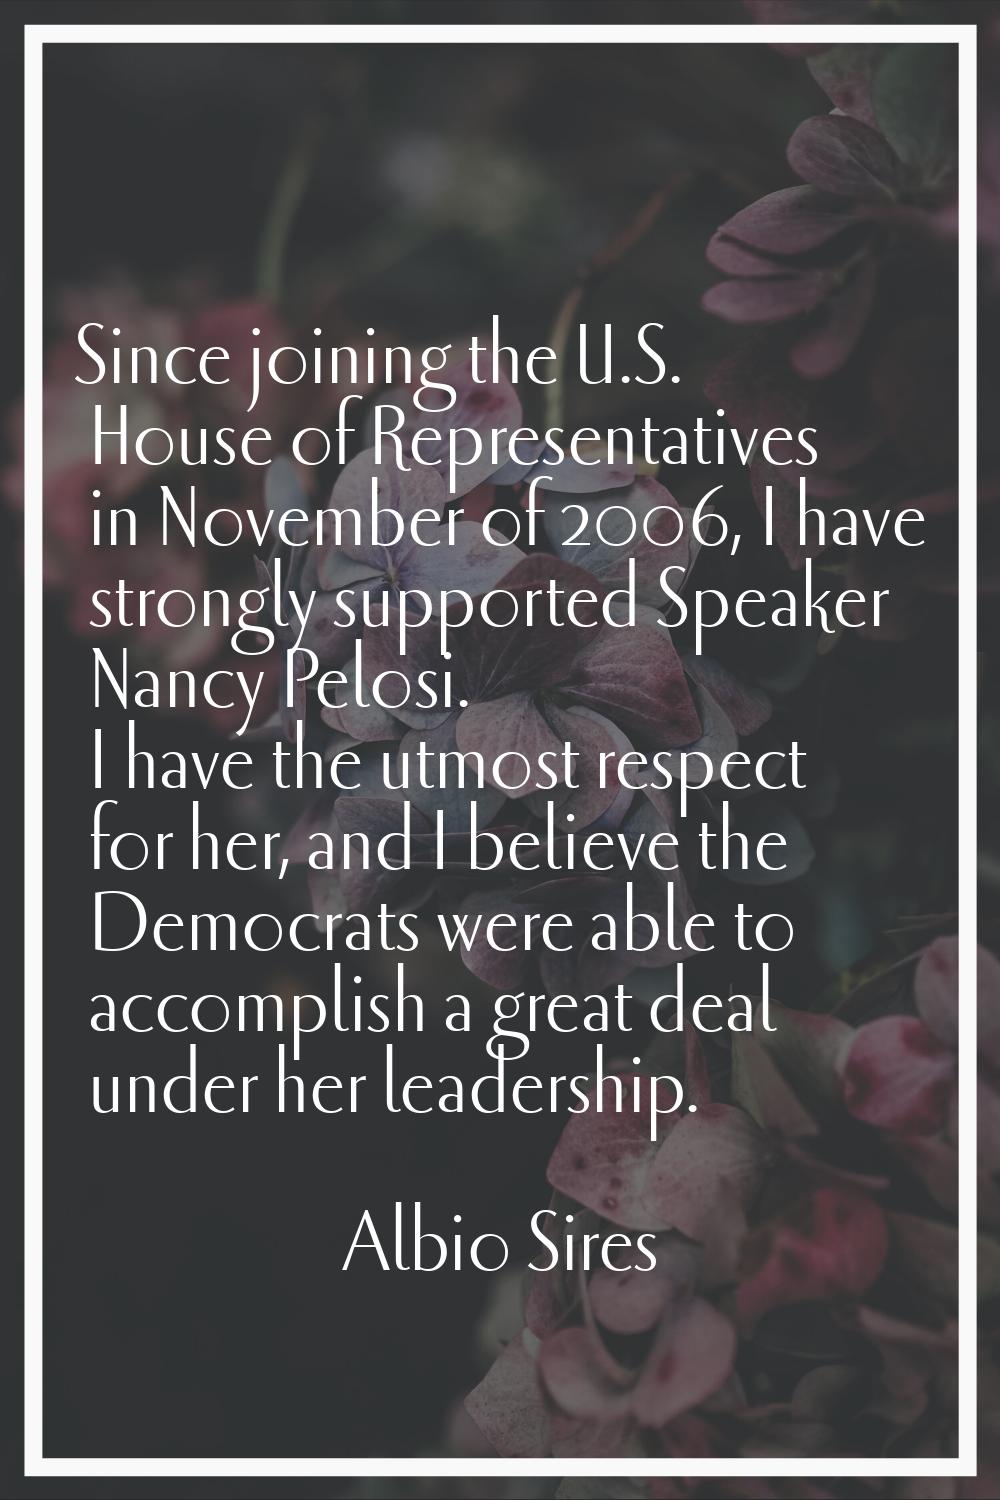 Since joining the U.S. House of Representatives in November of 2006, I have strongly supported Spea